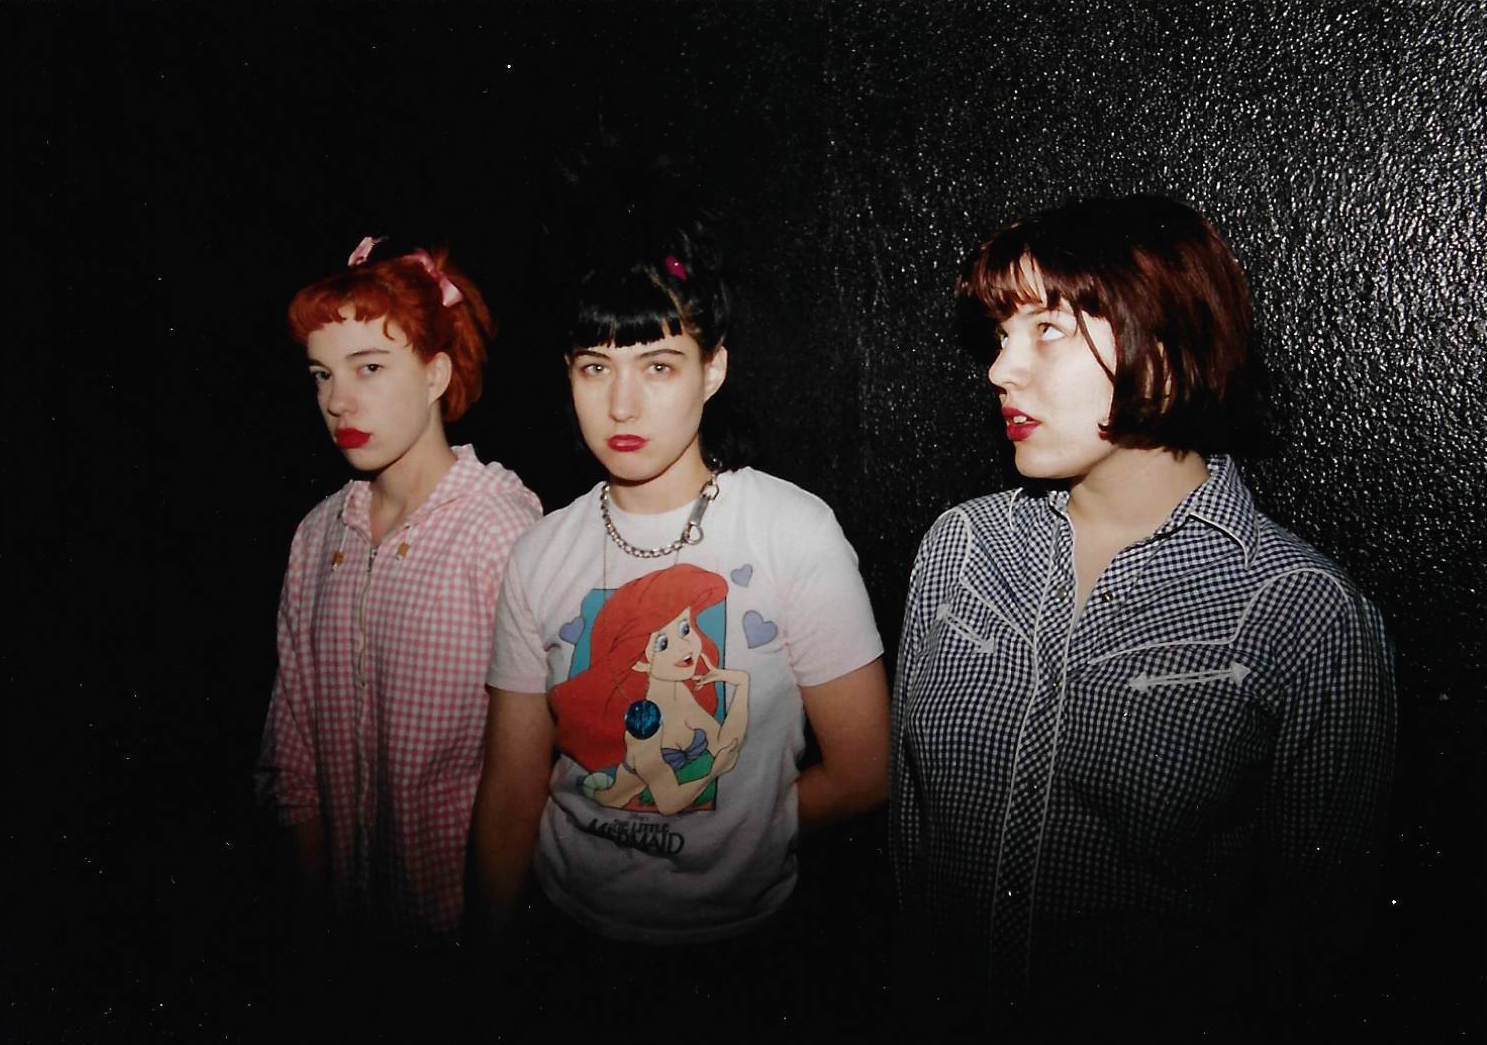 Kathleen Hanna On 'Rebel Girl' And Rock Camps, In Conversation With Ann  Powers : NPR